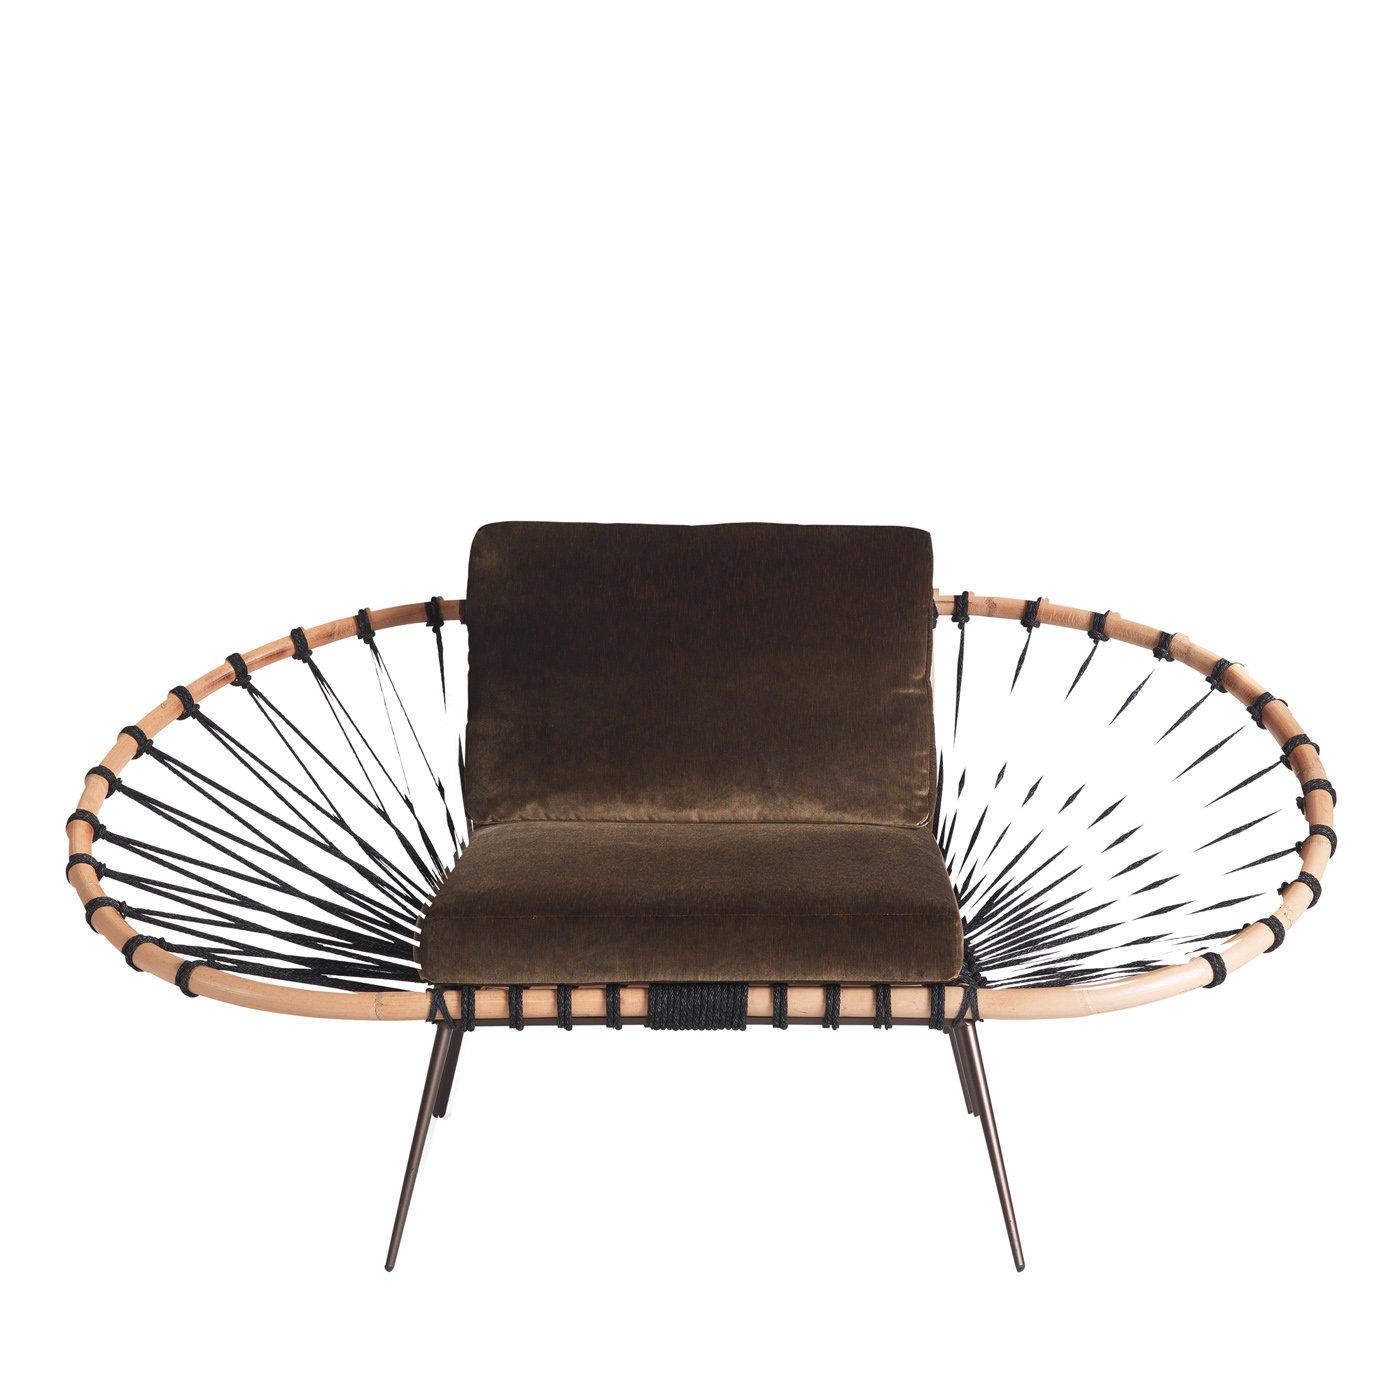 Sculptural in the details, this captivating armchair boasts an innovative and masterfully crafted silhouette. Harmoniously combining different materials, the structure is composed of metal feet and a reed framework on which is braided a black rope.